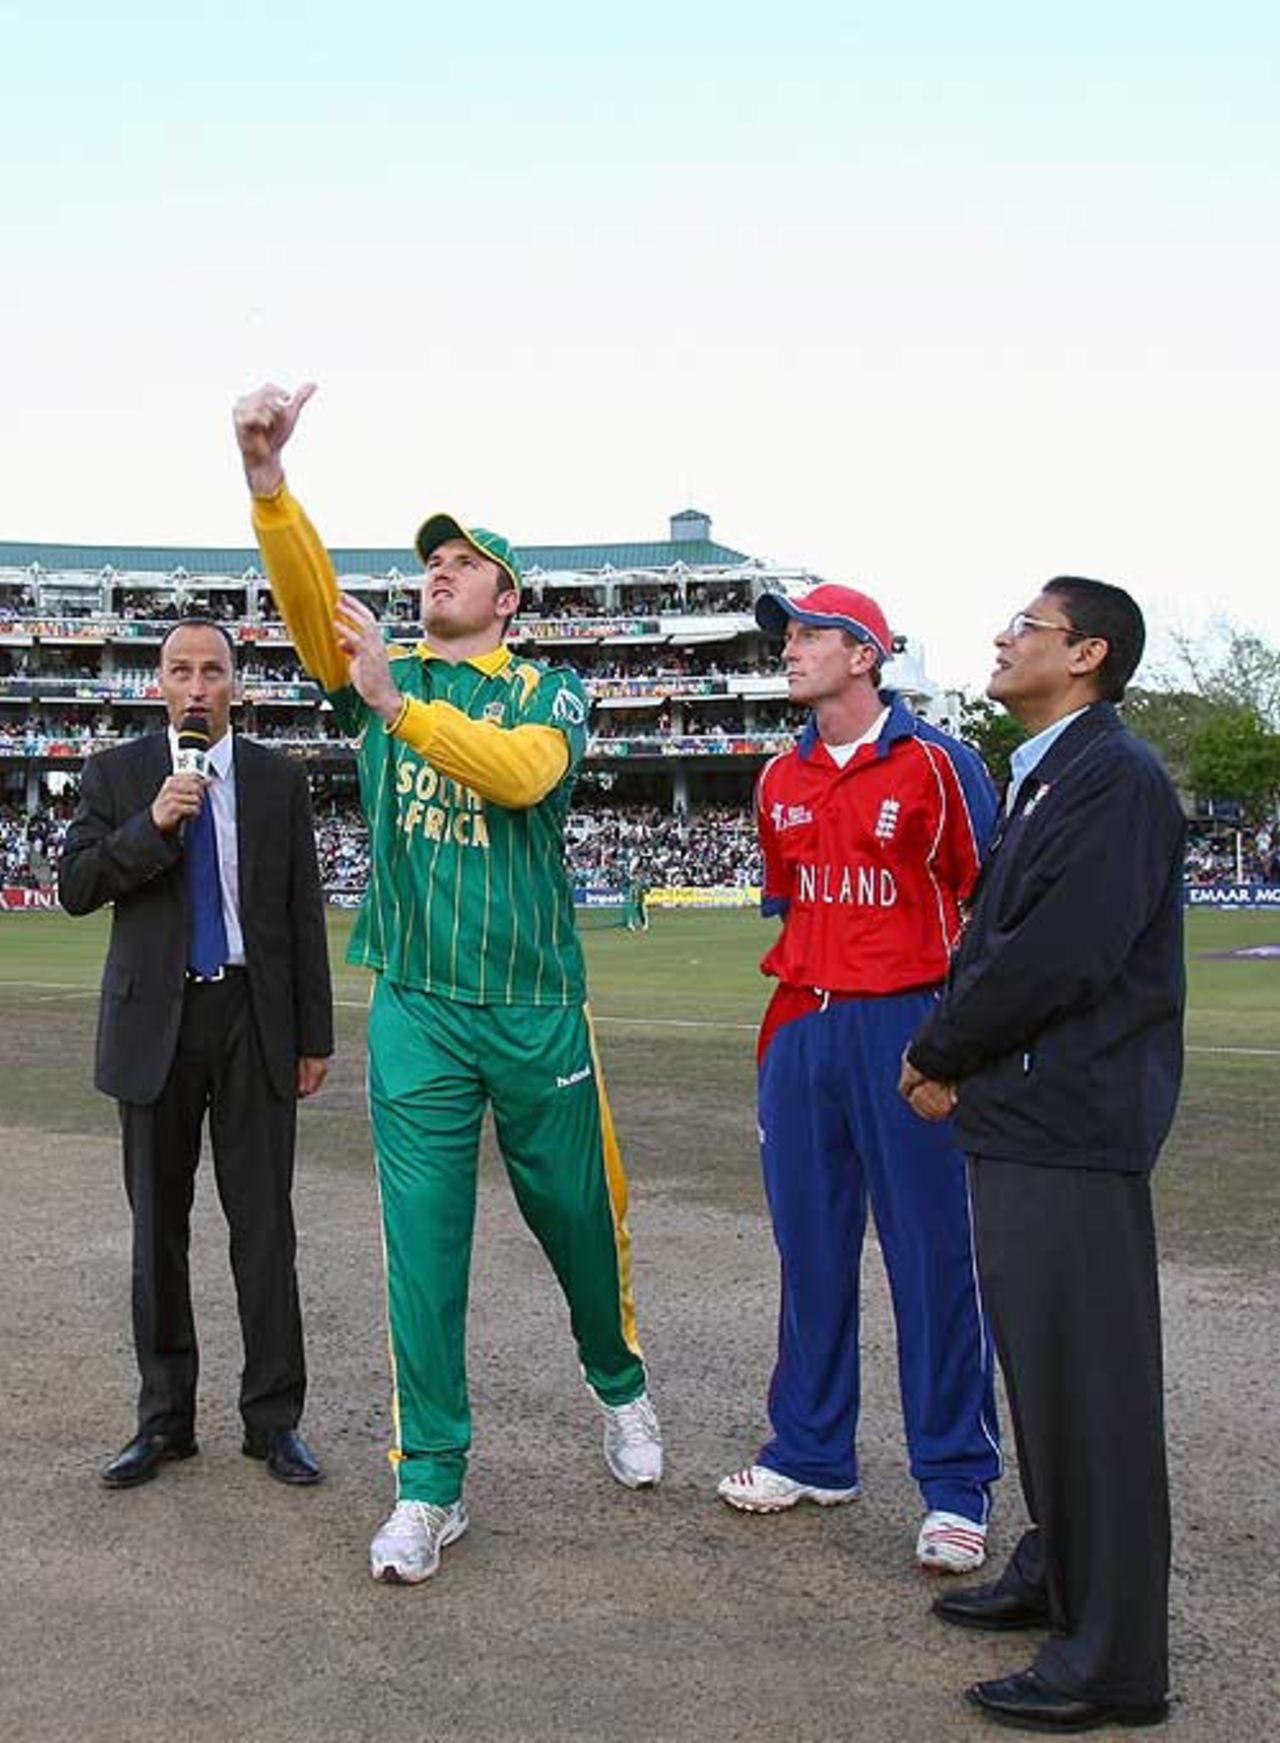 Graeme Smith tosses and Paul Collingwood calls correctly, Group E, ICC World Twenty20, Cape Town, September 16, 2007